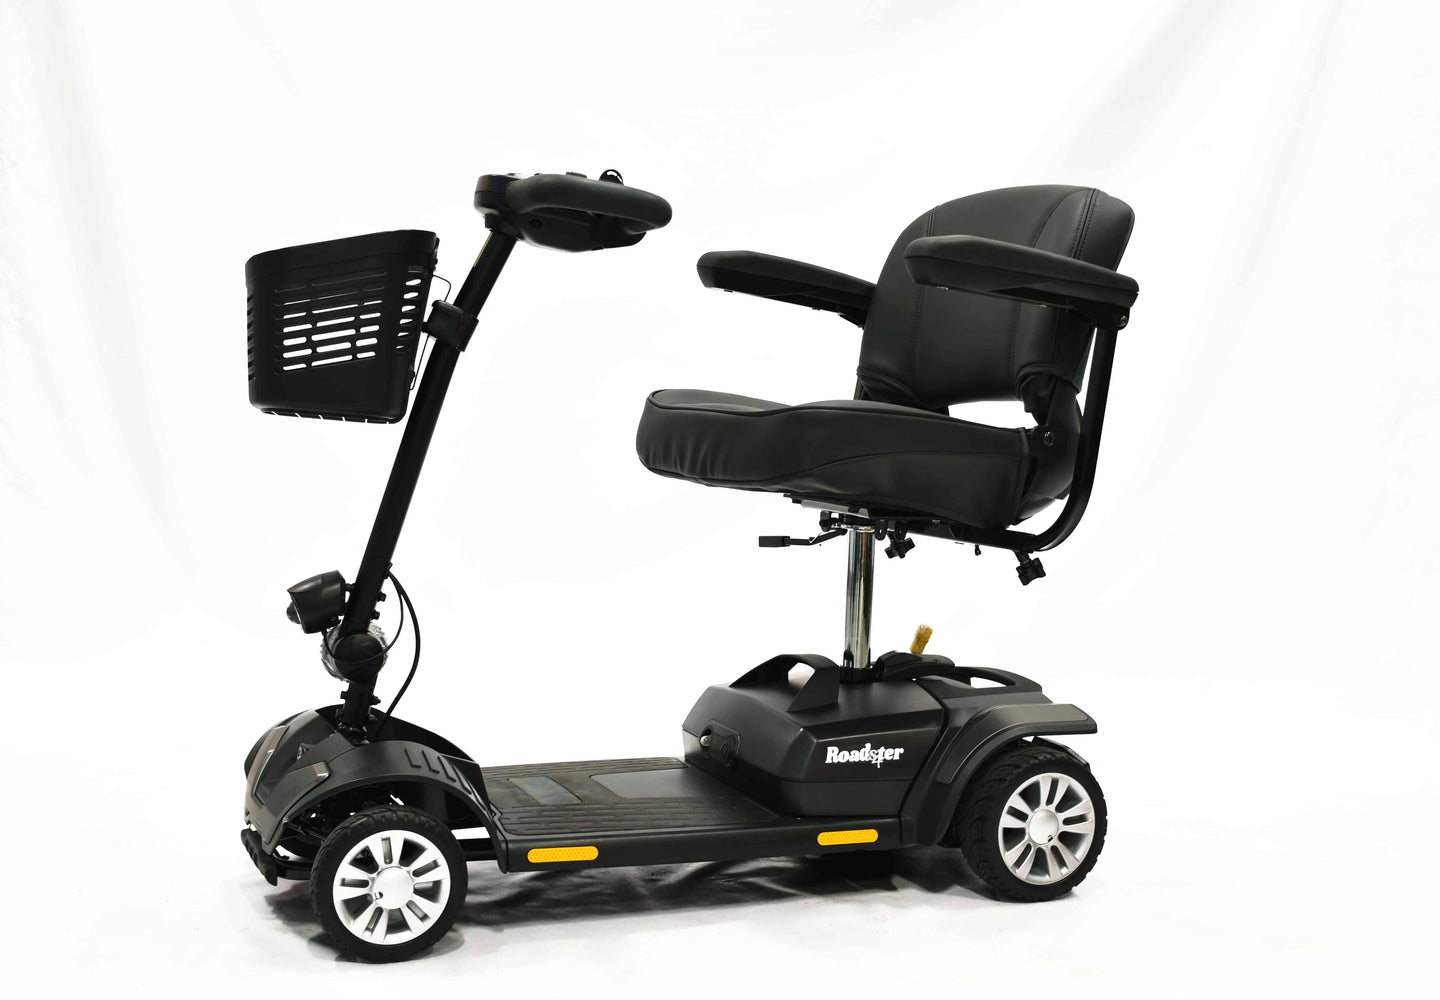 Roadster S4 Side View Mobility Scooter by Merits